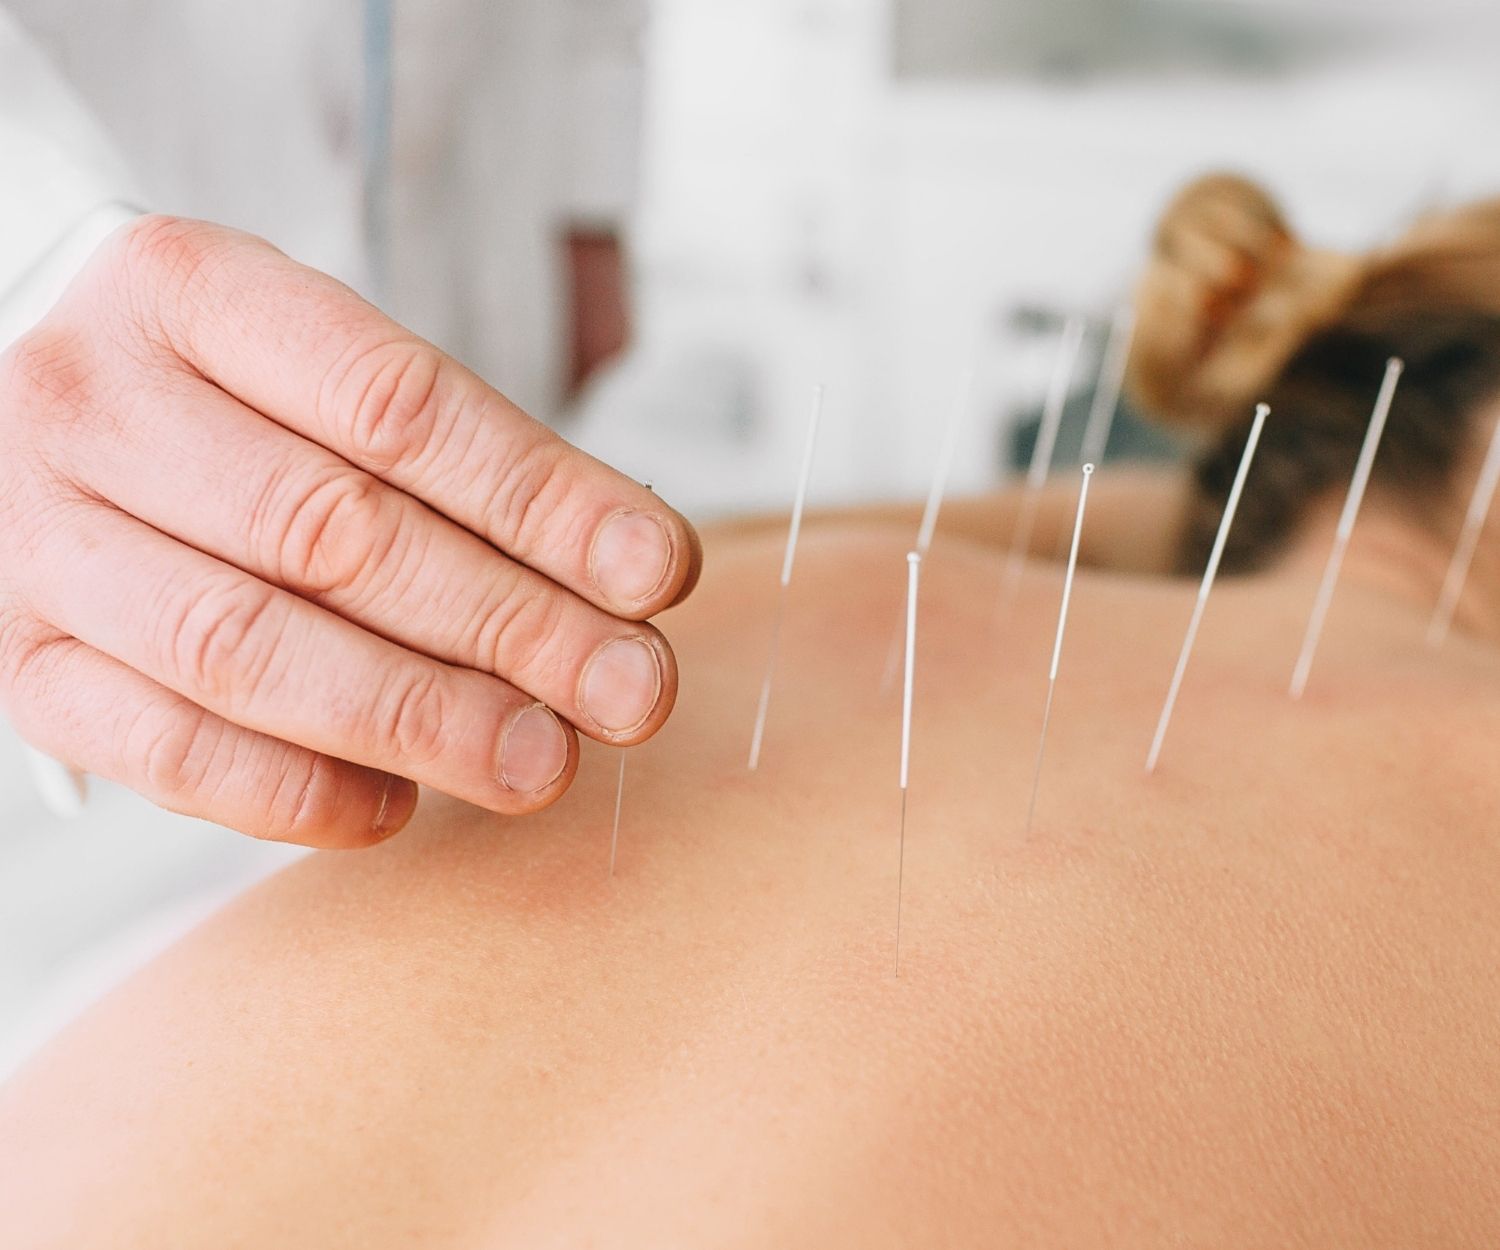 acupuncture - Active Health 